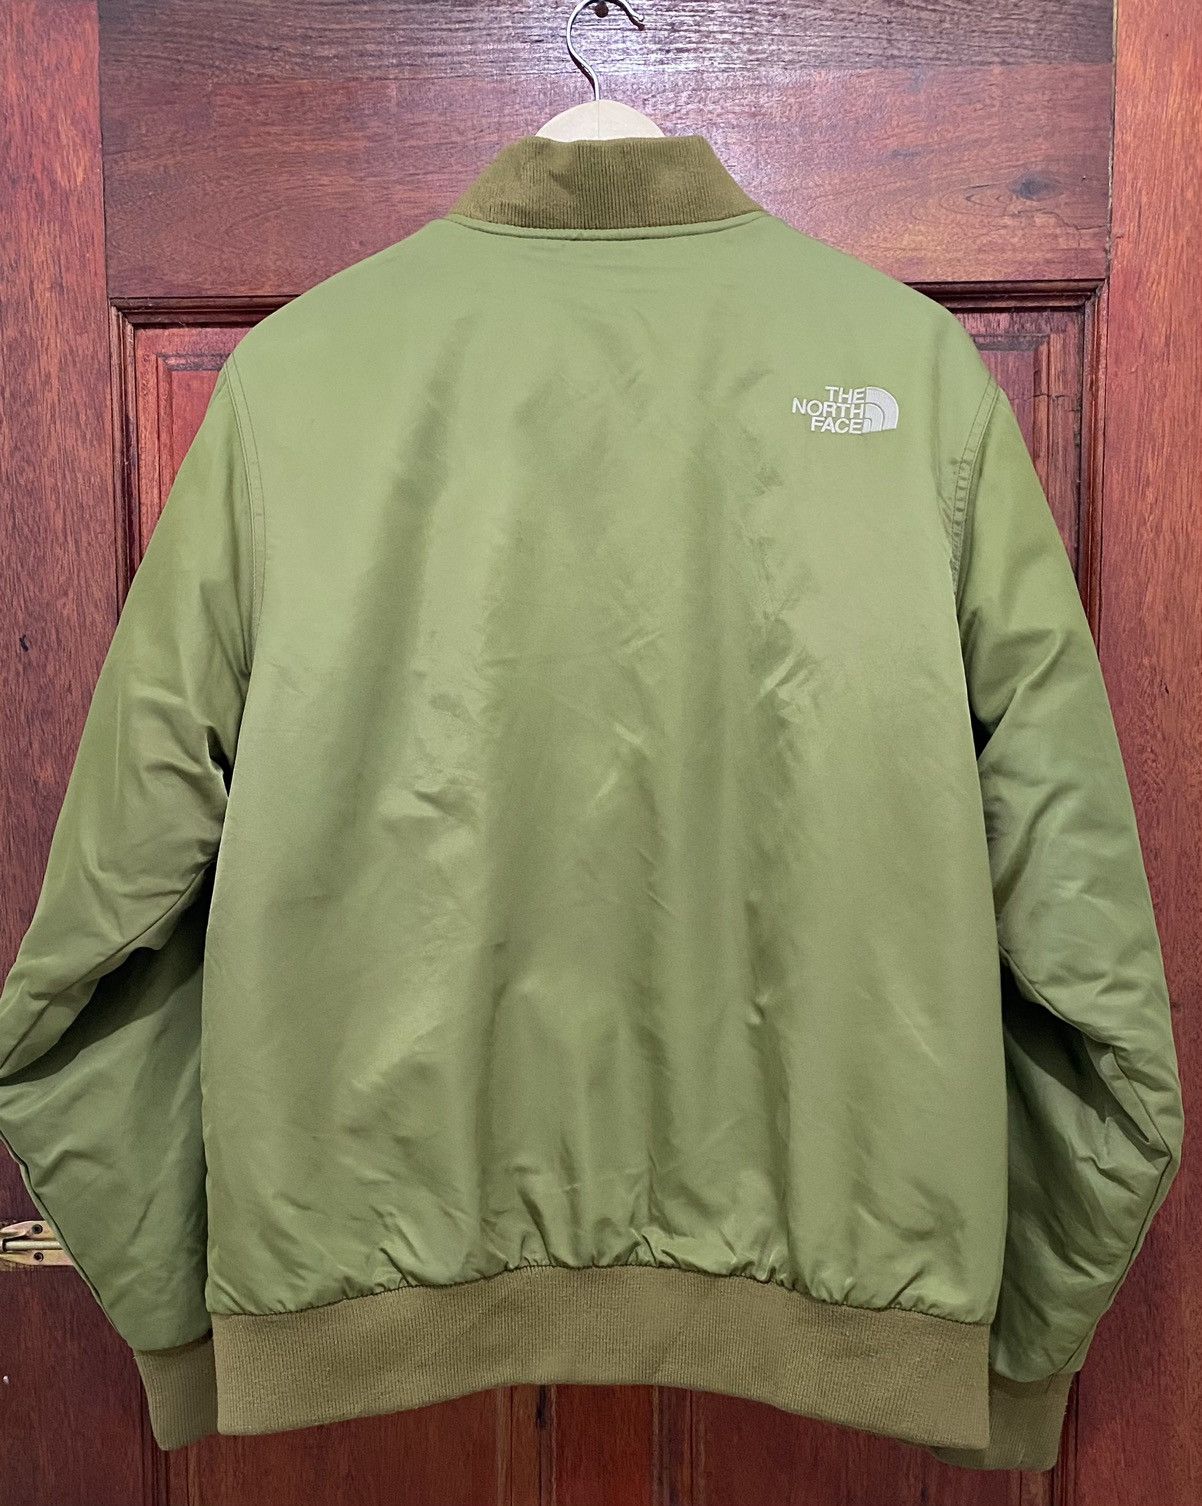 The North Face Ma-1 Jacket Design Military Olive Green - 2